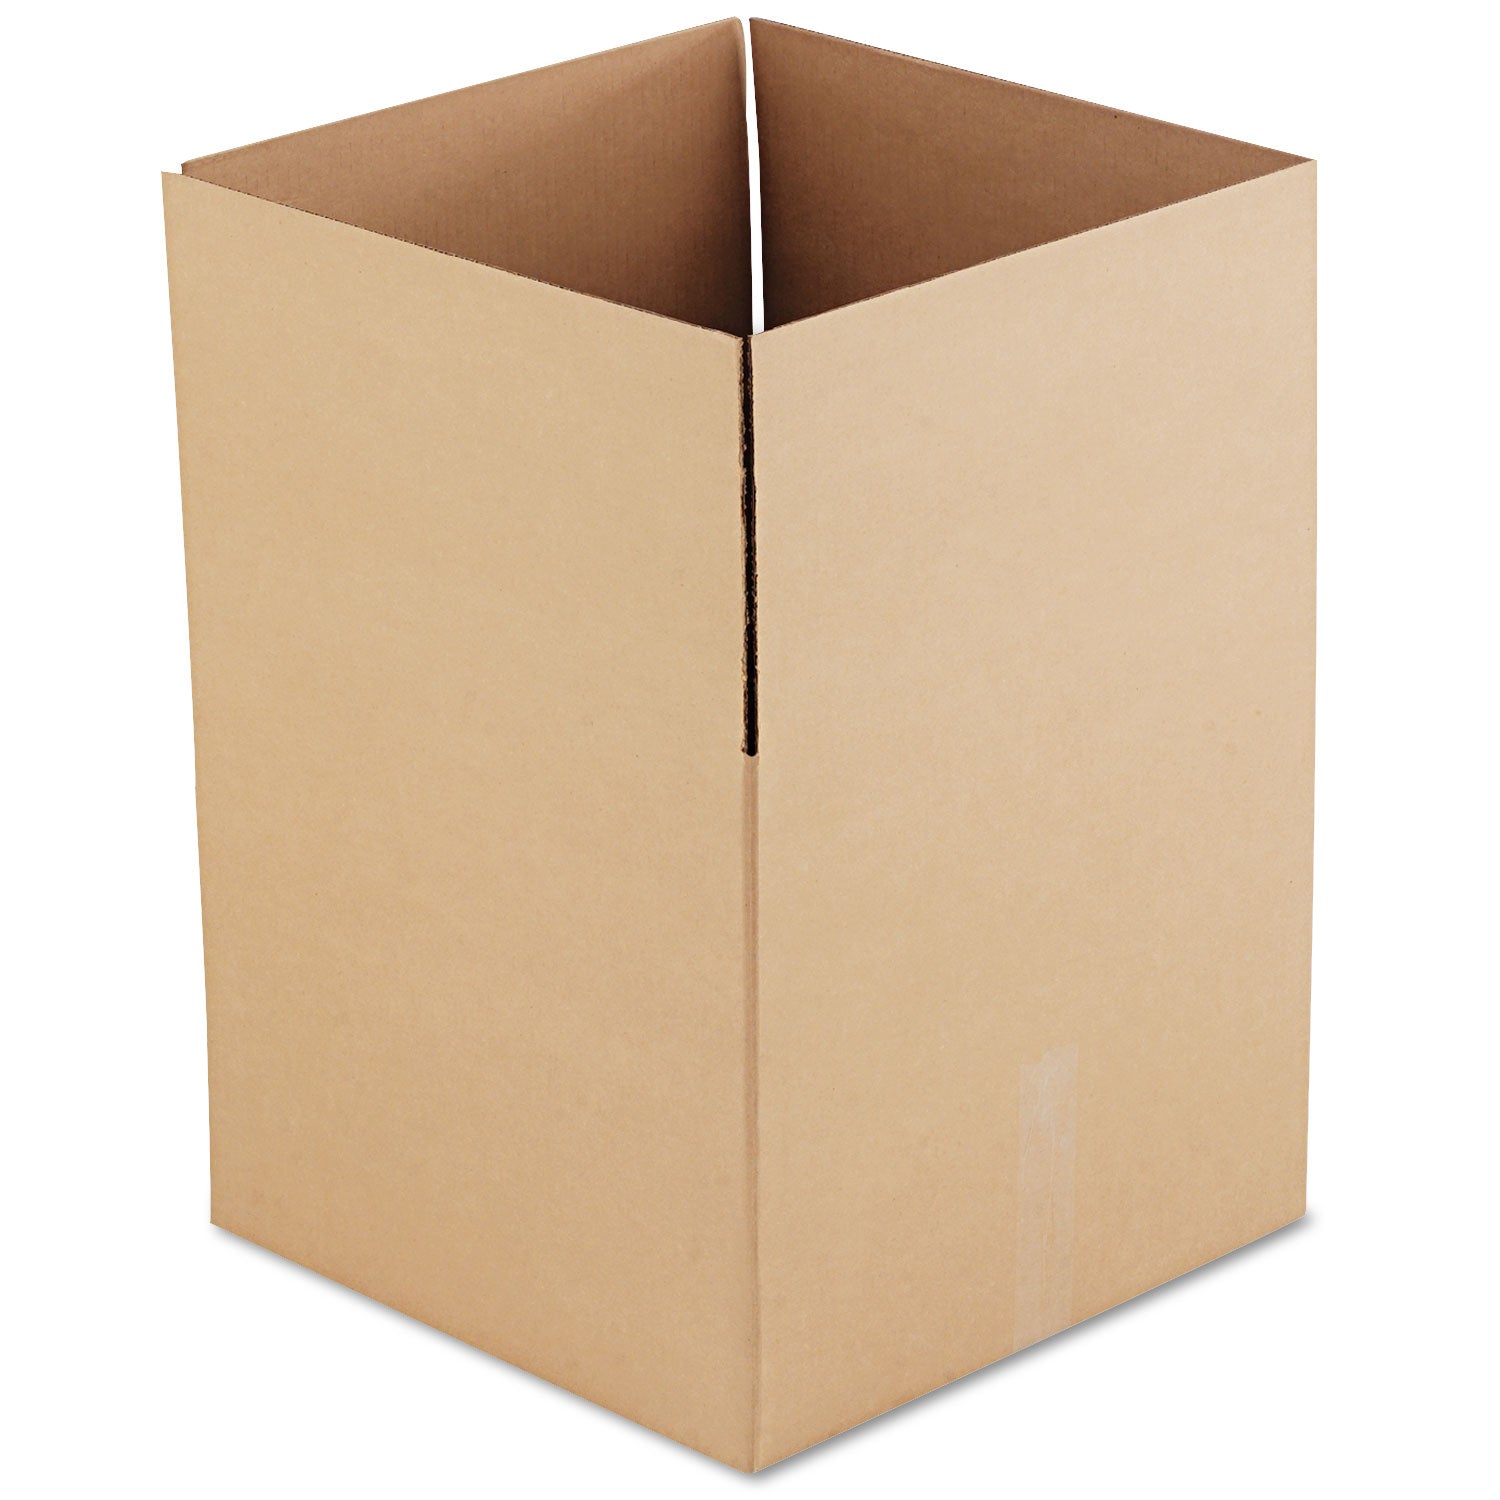 fixed-depth-corrugated-shipping-boxes-regular-slotted-container-rsc-18-x-18-x-16-brown-kraft-15-bundle_unv181816 - 1